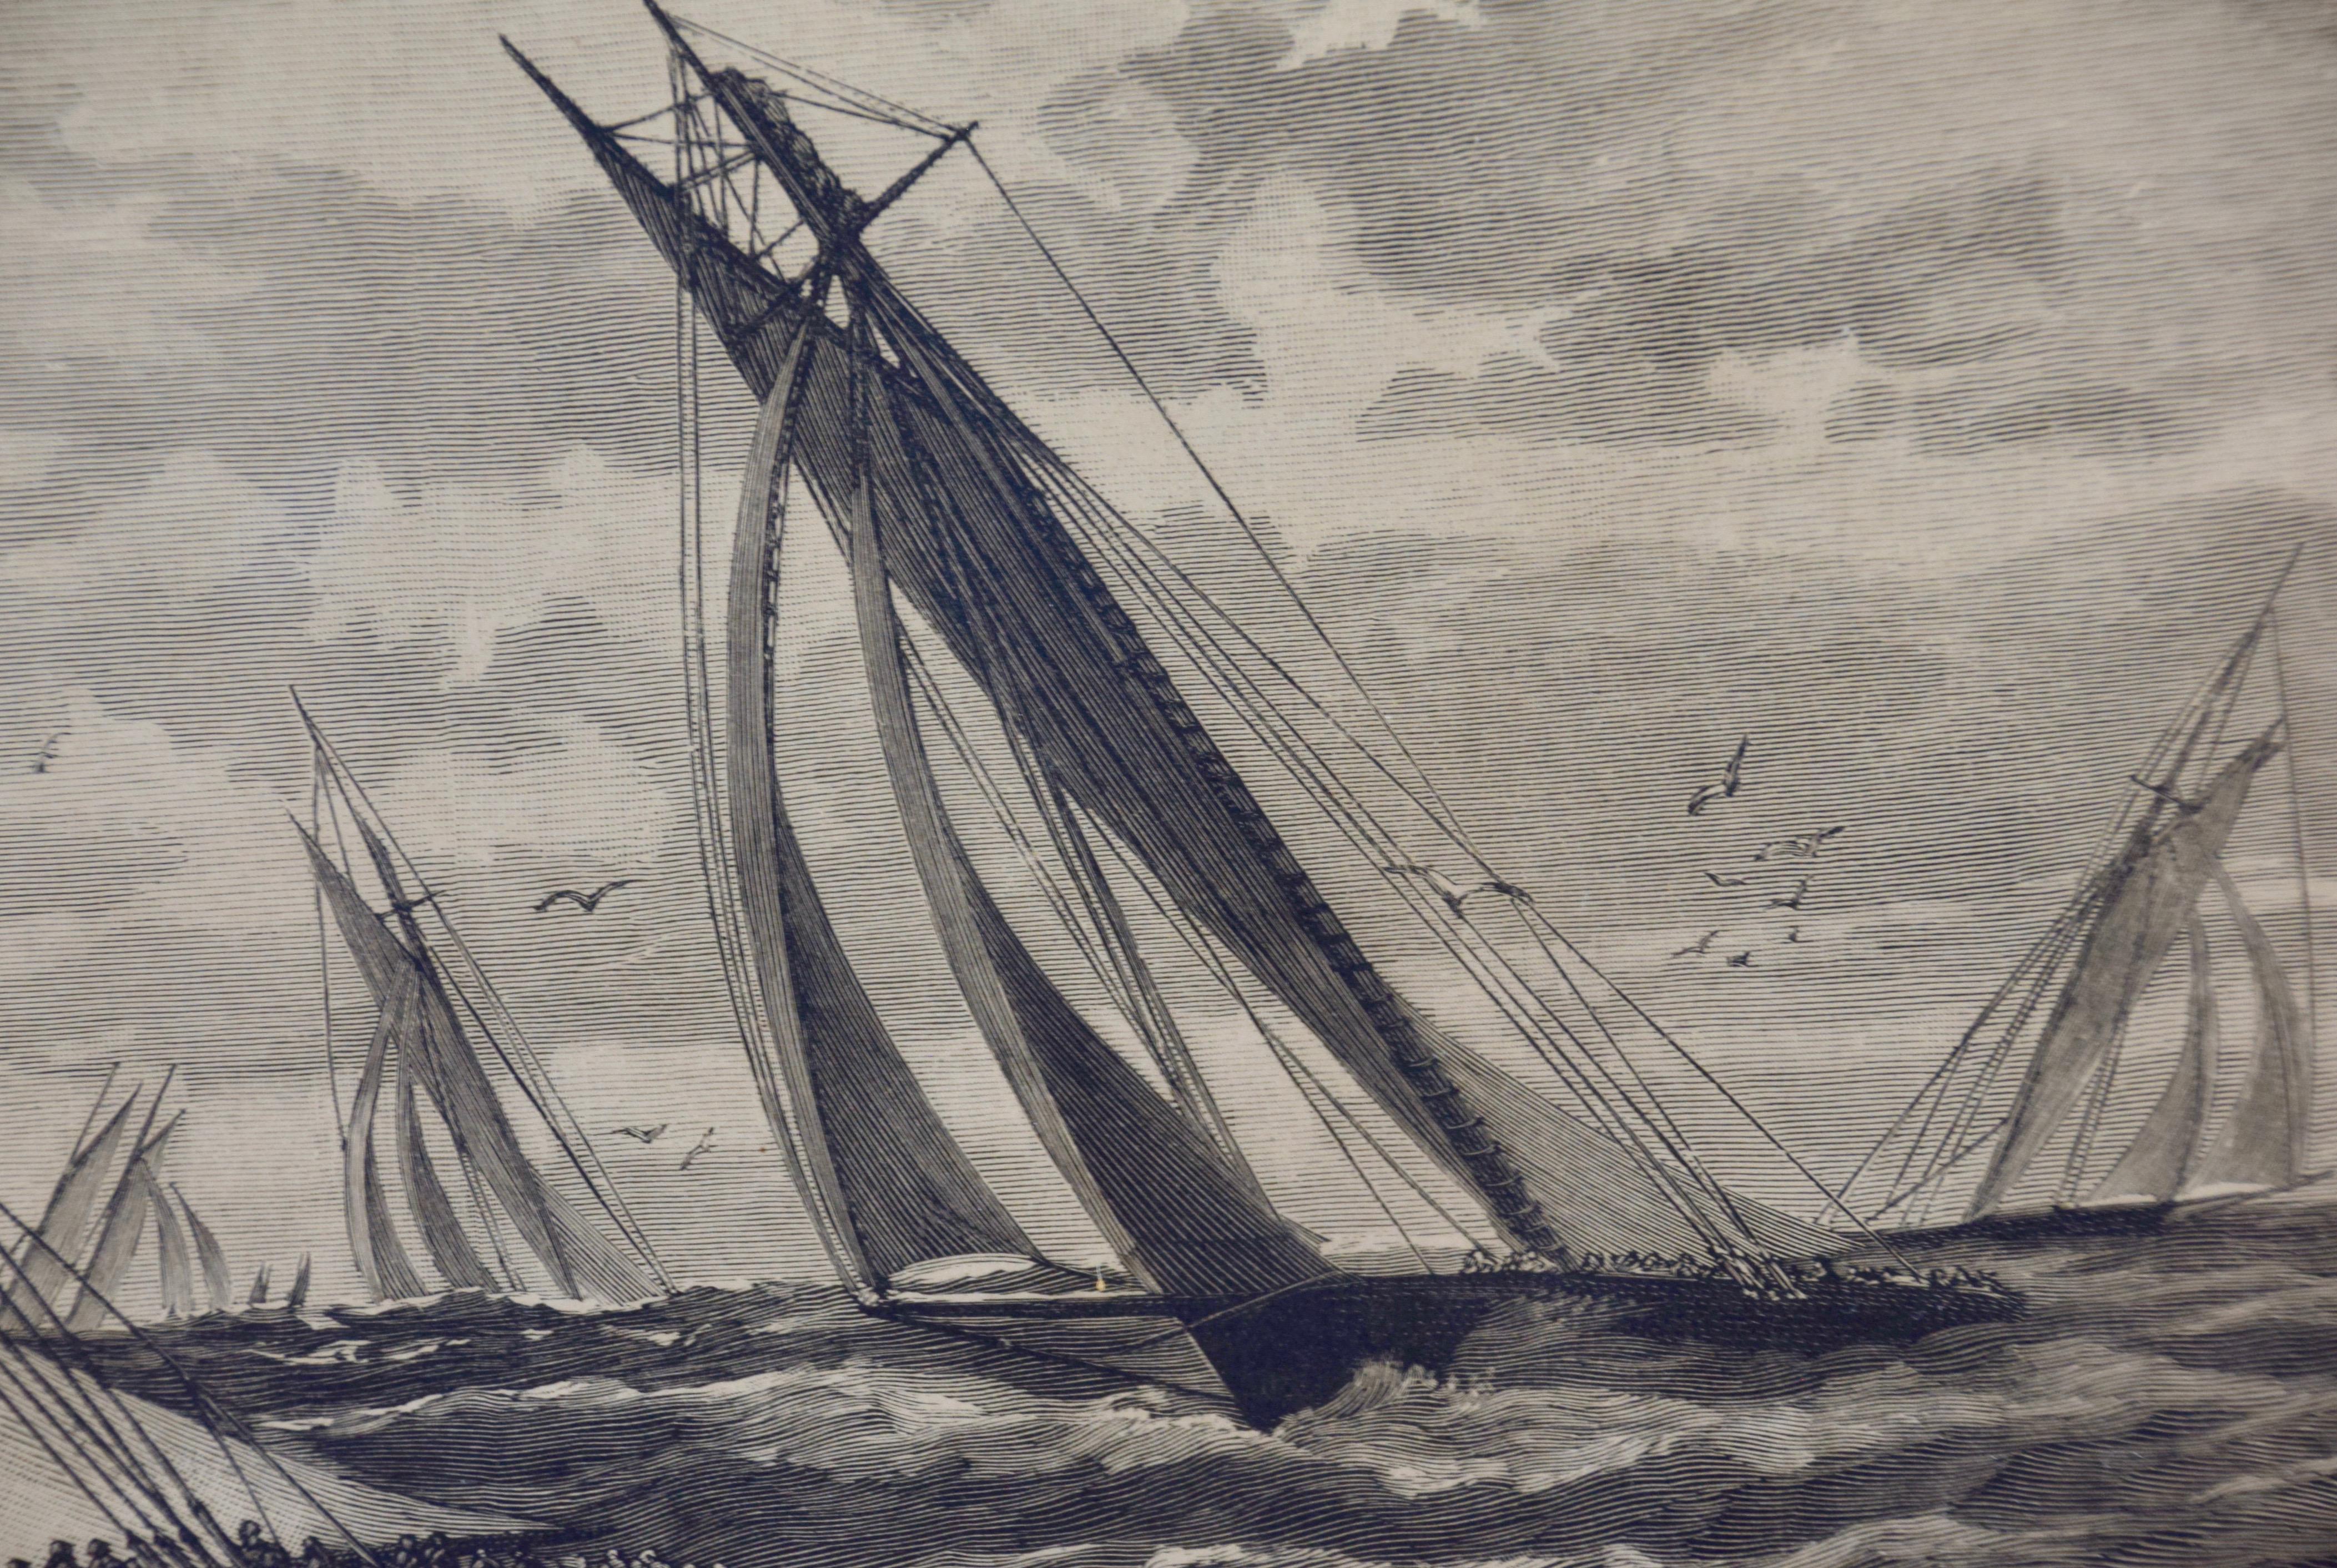 Three woodcut engravings produced in 1885 to commemorate the sailing yacht trials competition to determine the team to represent the United States in the America's Cup races off the New Jersey coast in that same year. 

These three beautiful woodcut